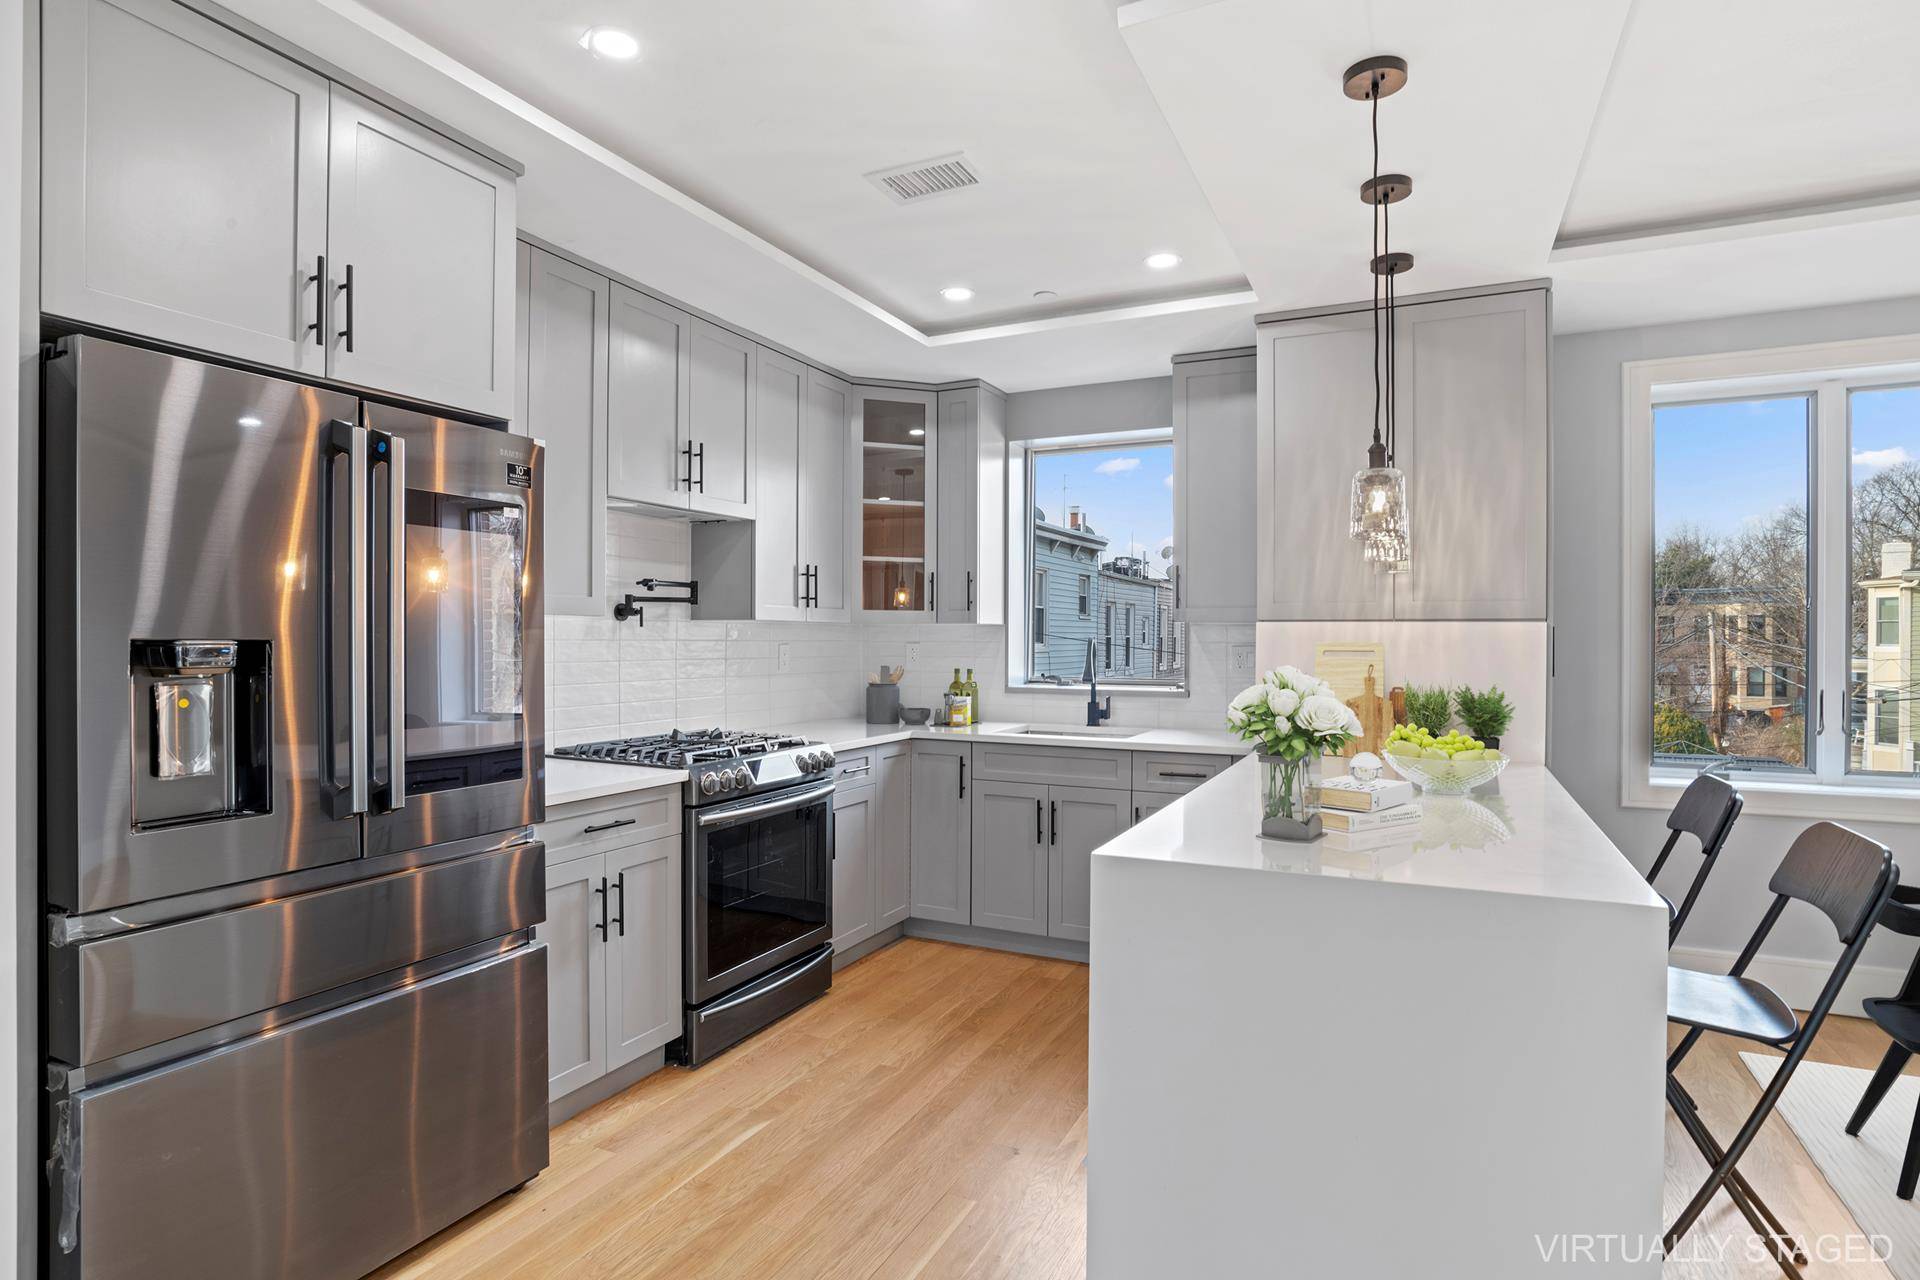 Make this your new home, a brand new and very spacious 2 Bedroom CONDO located in Windsor Terrace, one of Brooklyn's most desirable neighborhoods.